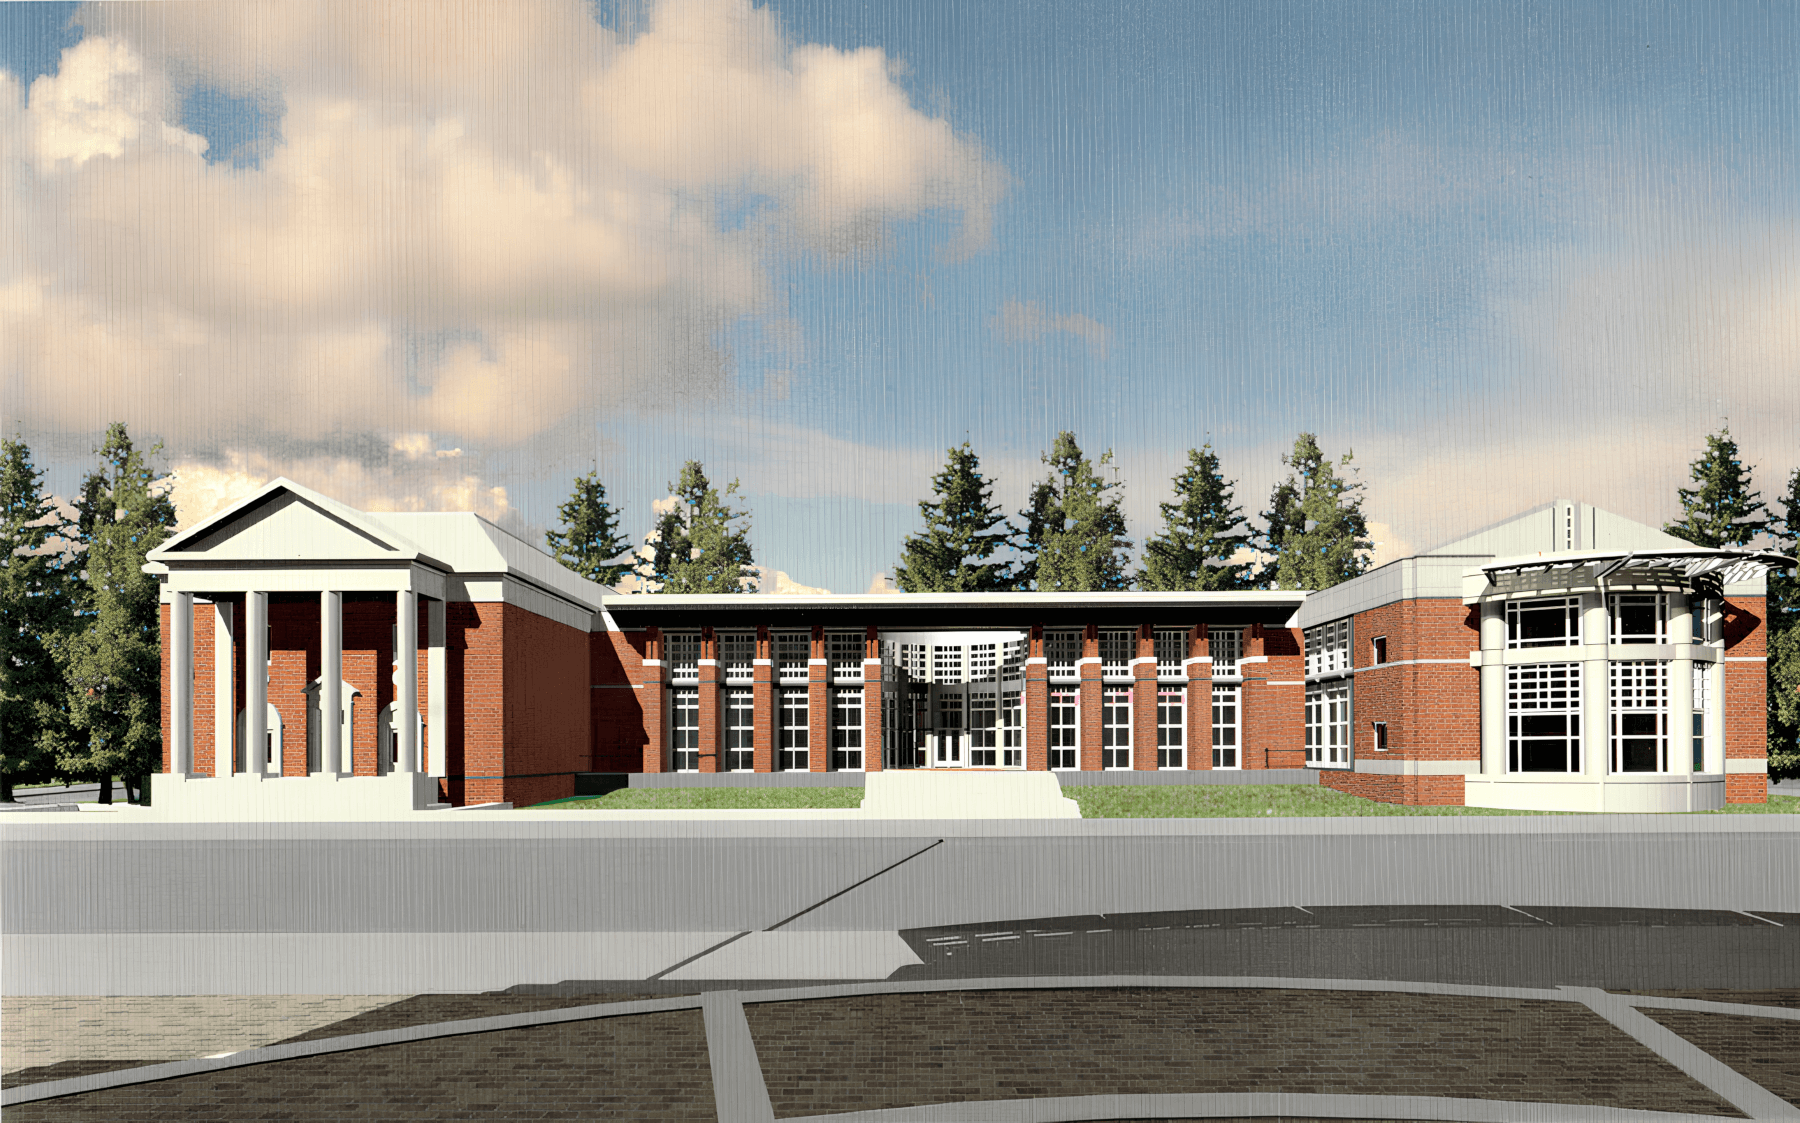 Rendered image of the Klamath County Admin Building, designed by architect Jeff Finsand.